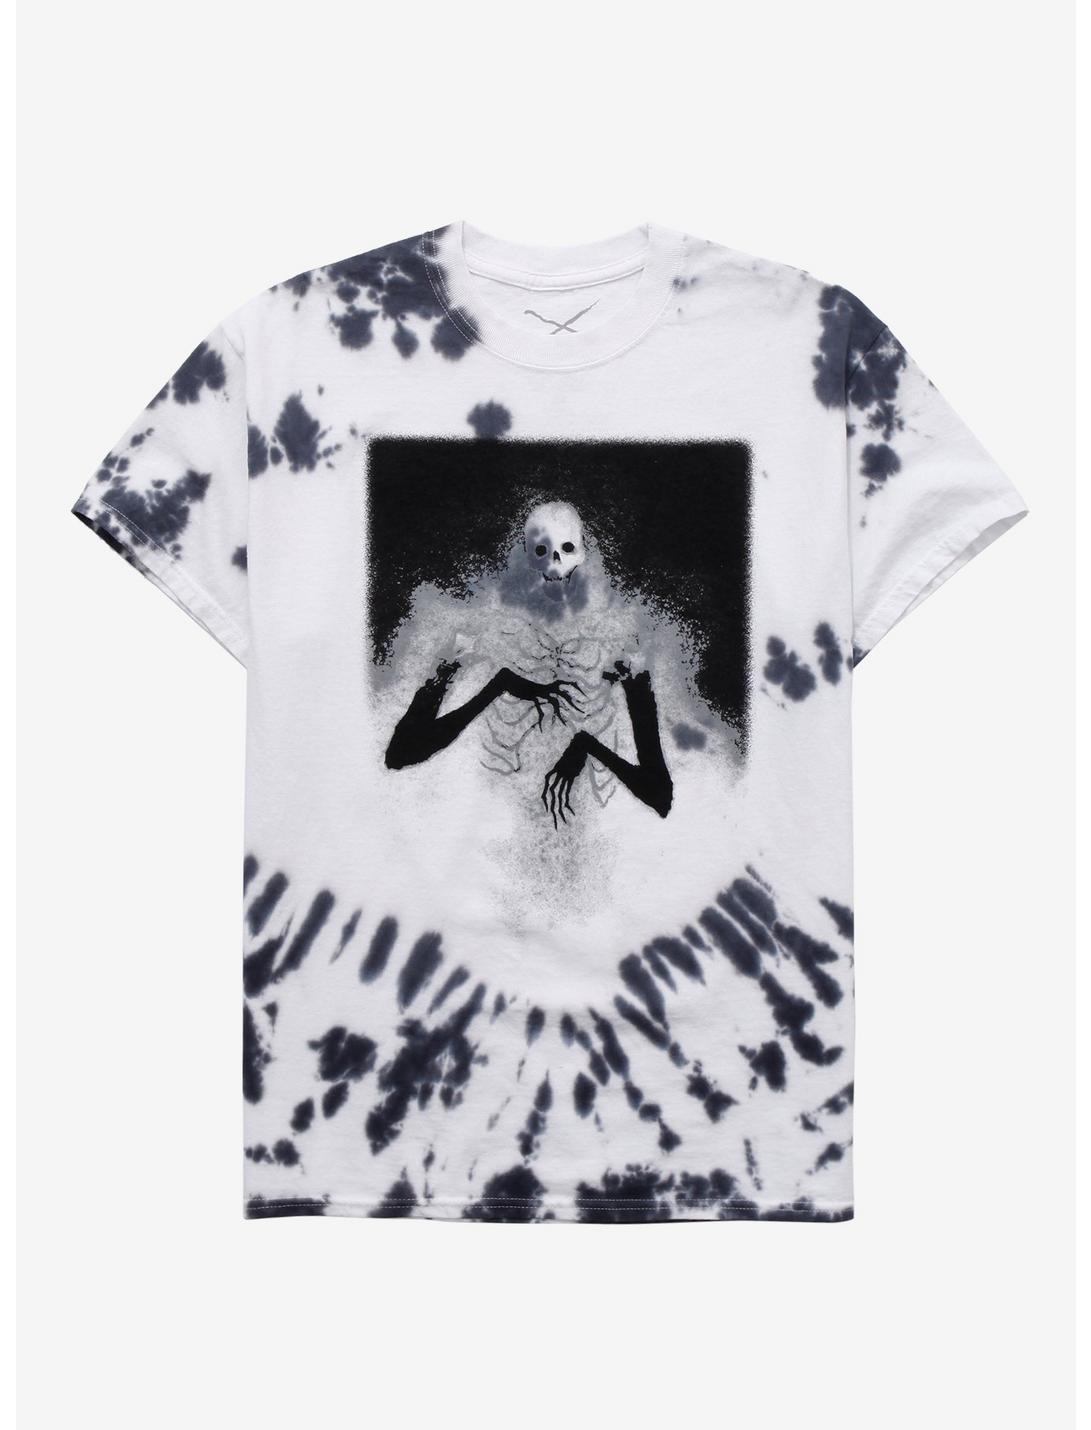 Mire Black & White Tie-Dye T-Shirt By Built From Sketch, BLACK, hi-res